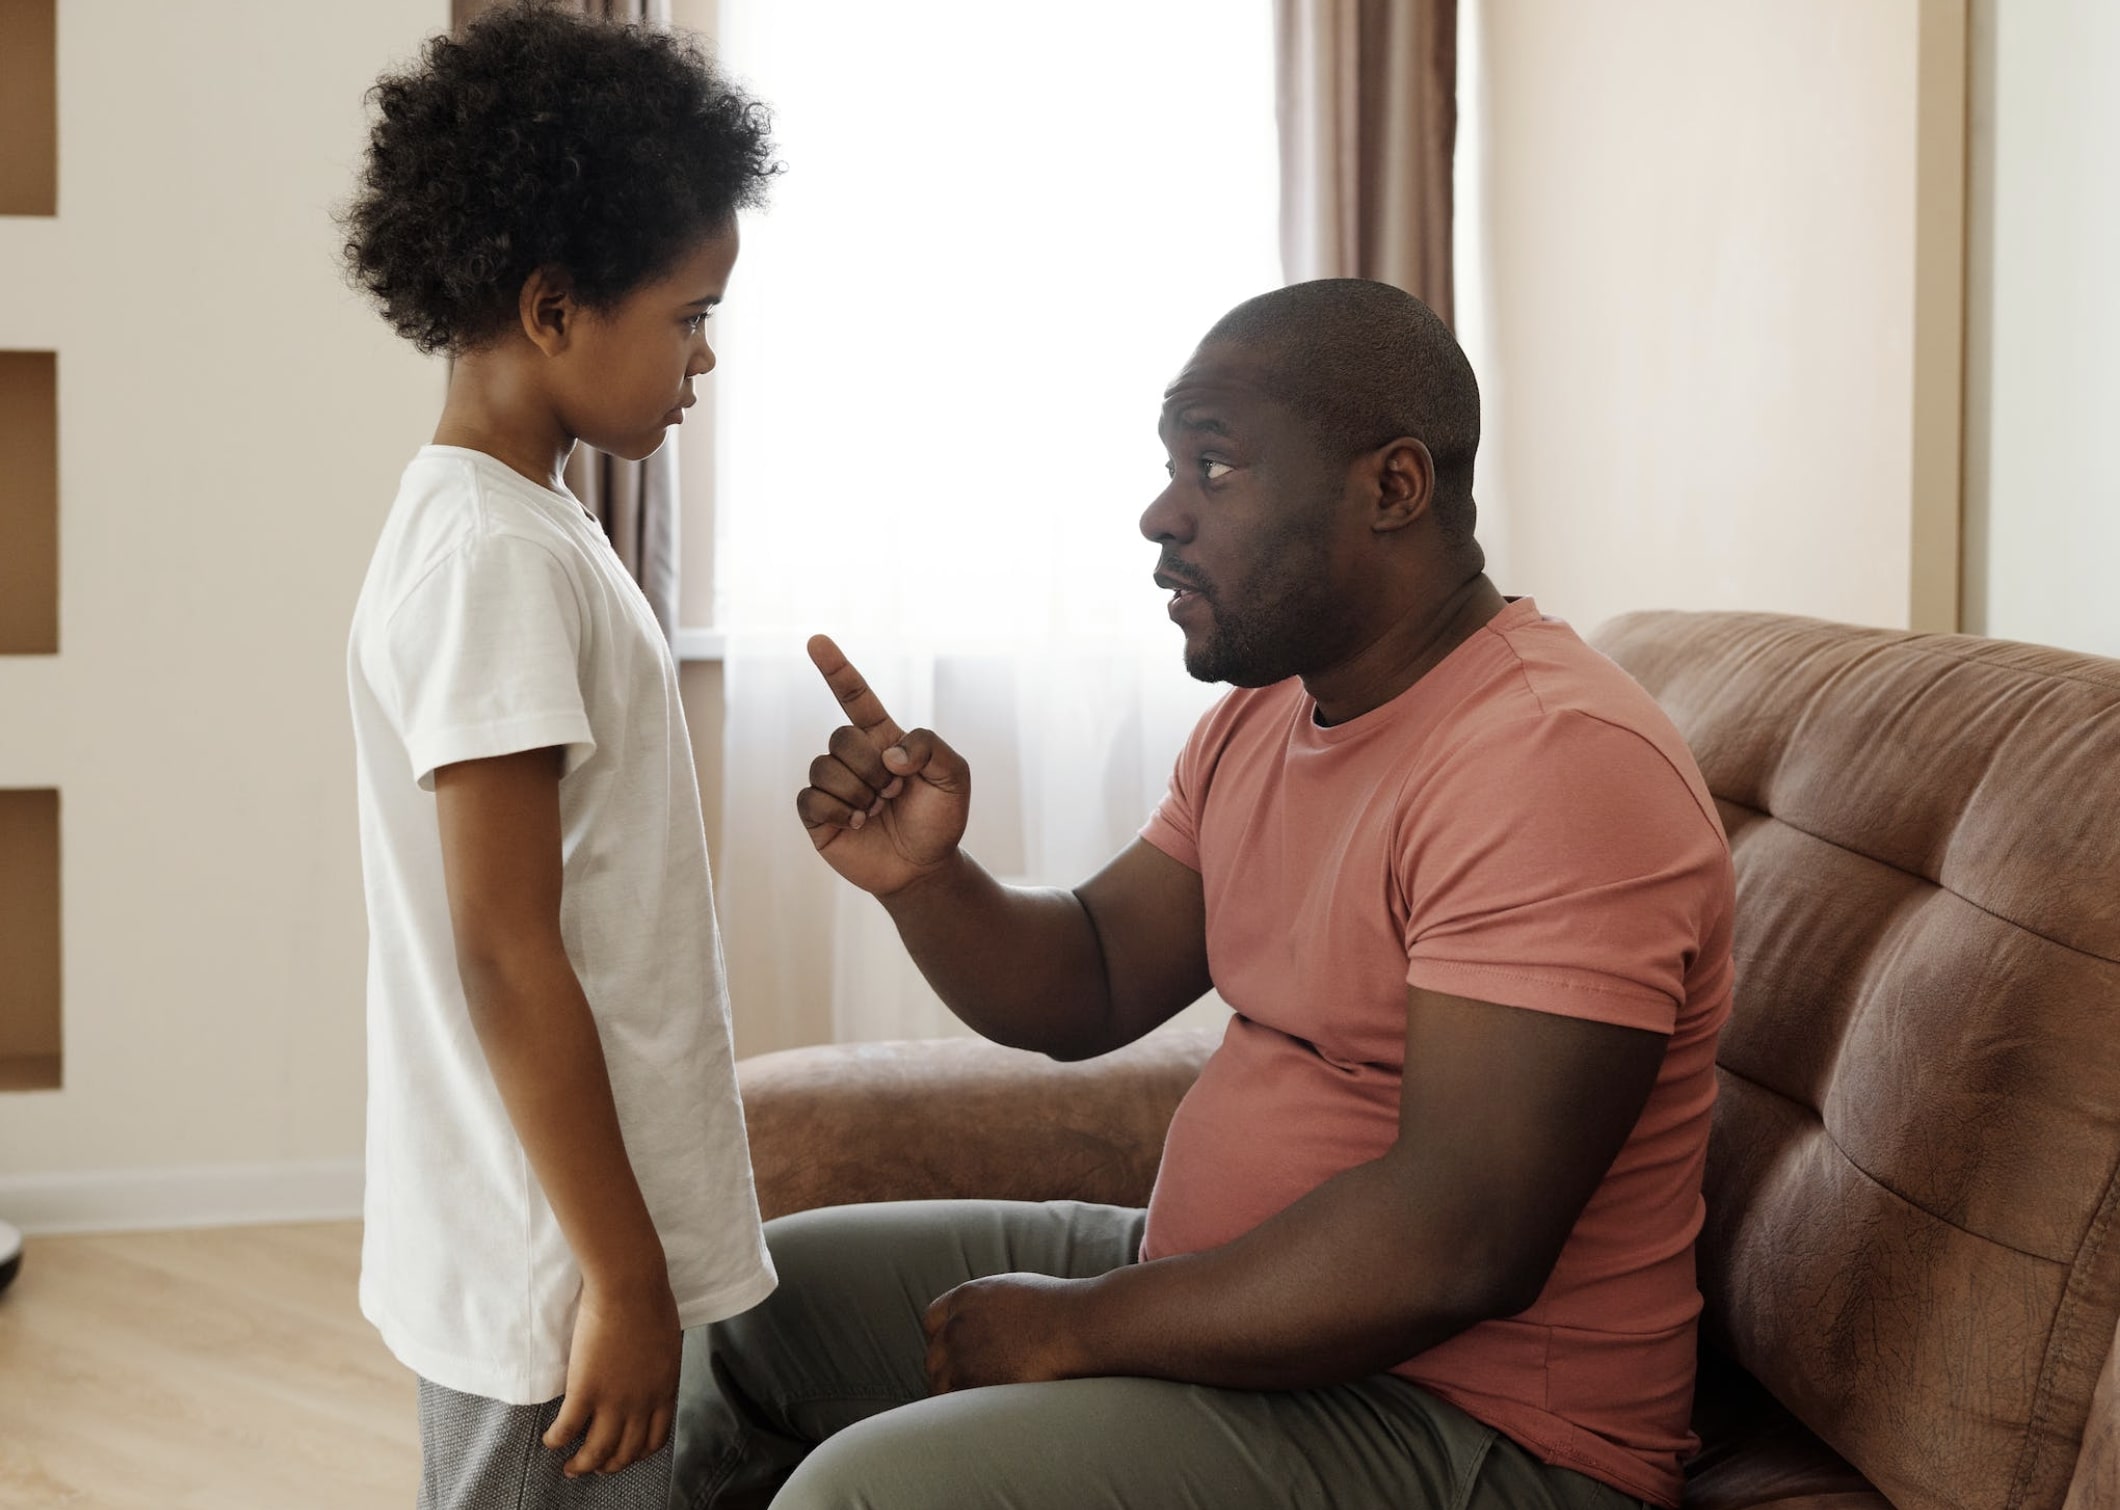 Man talking with child on couch